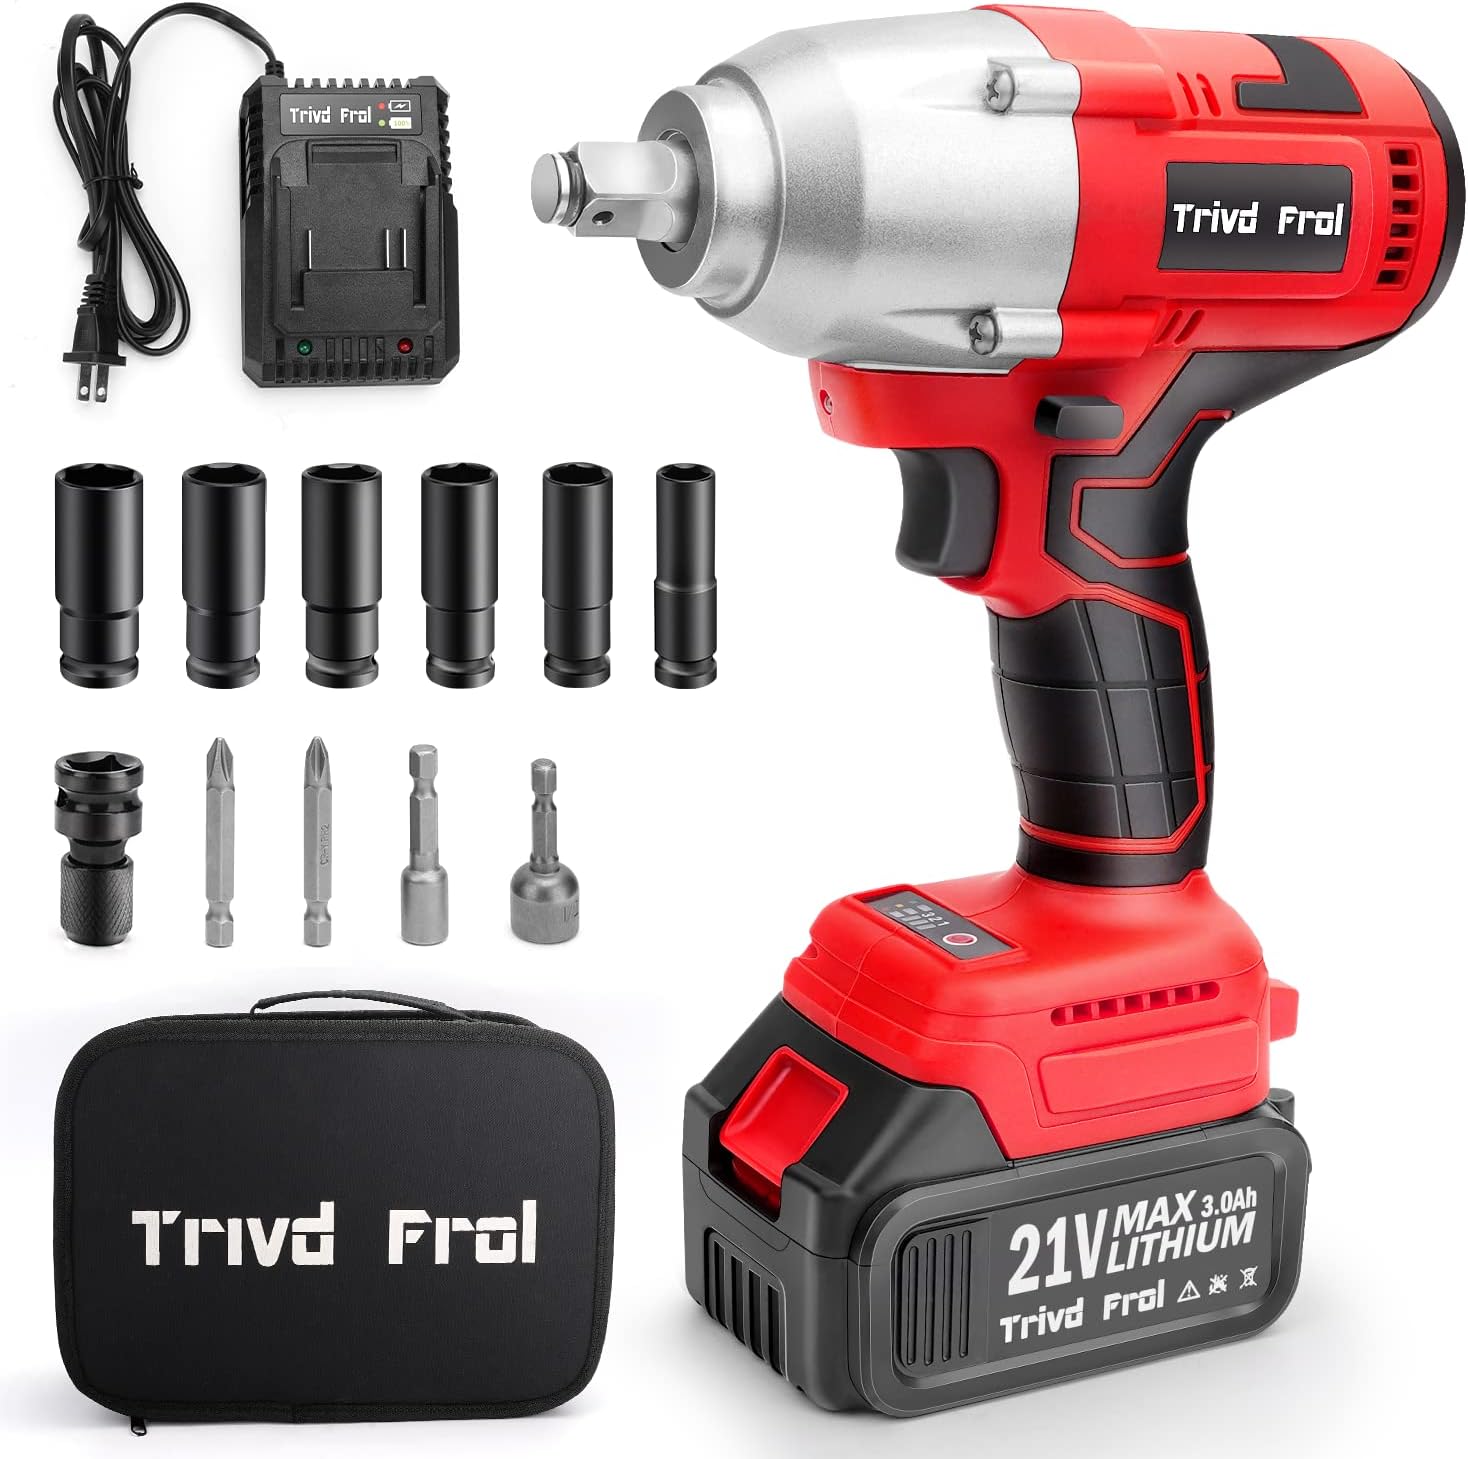 Trivd Frol Cordless Impact Wrench 1/2 inch, 21V [...]